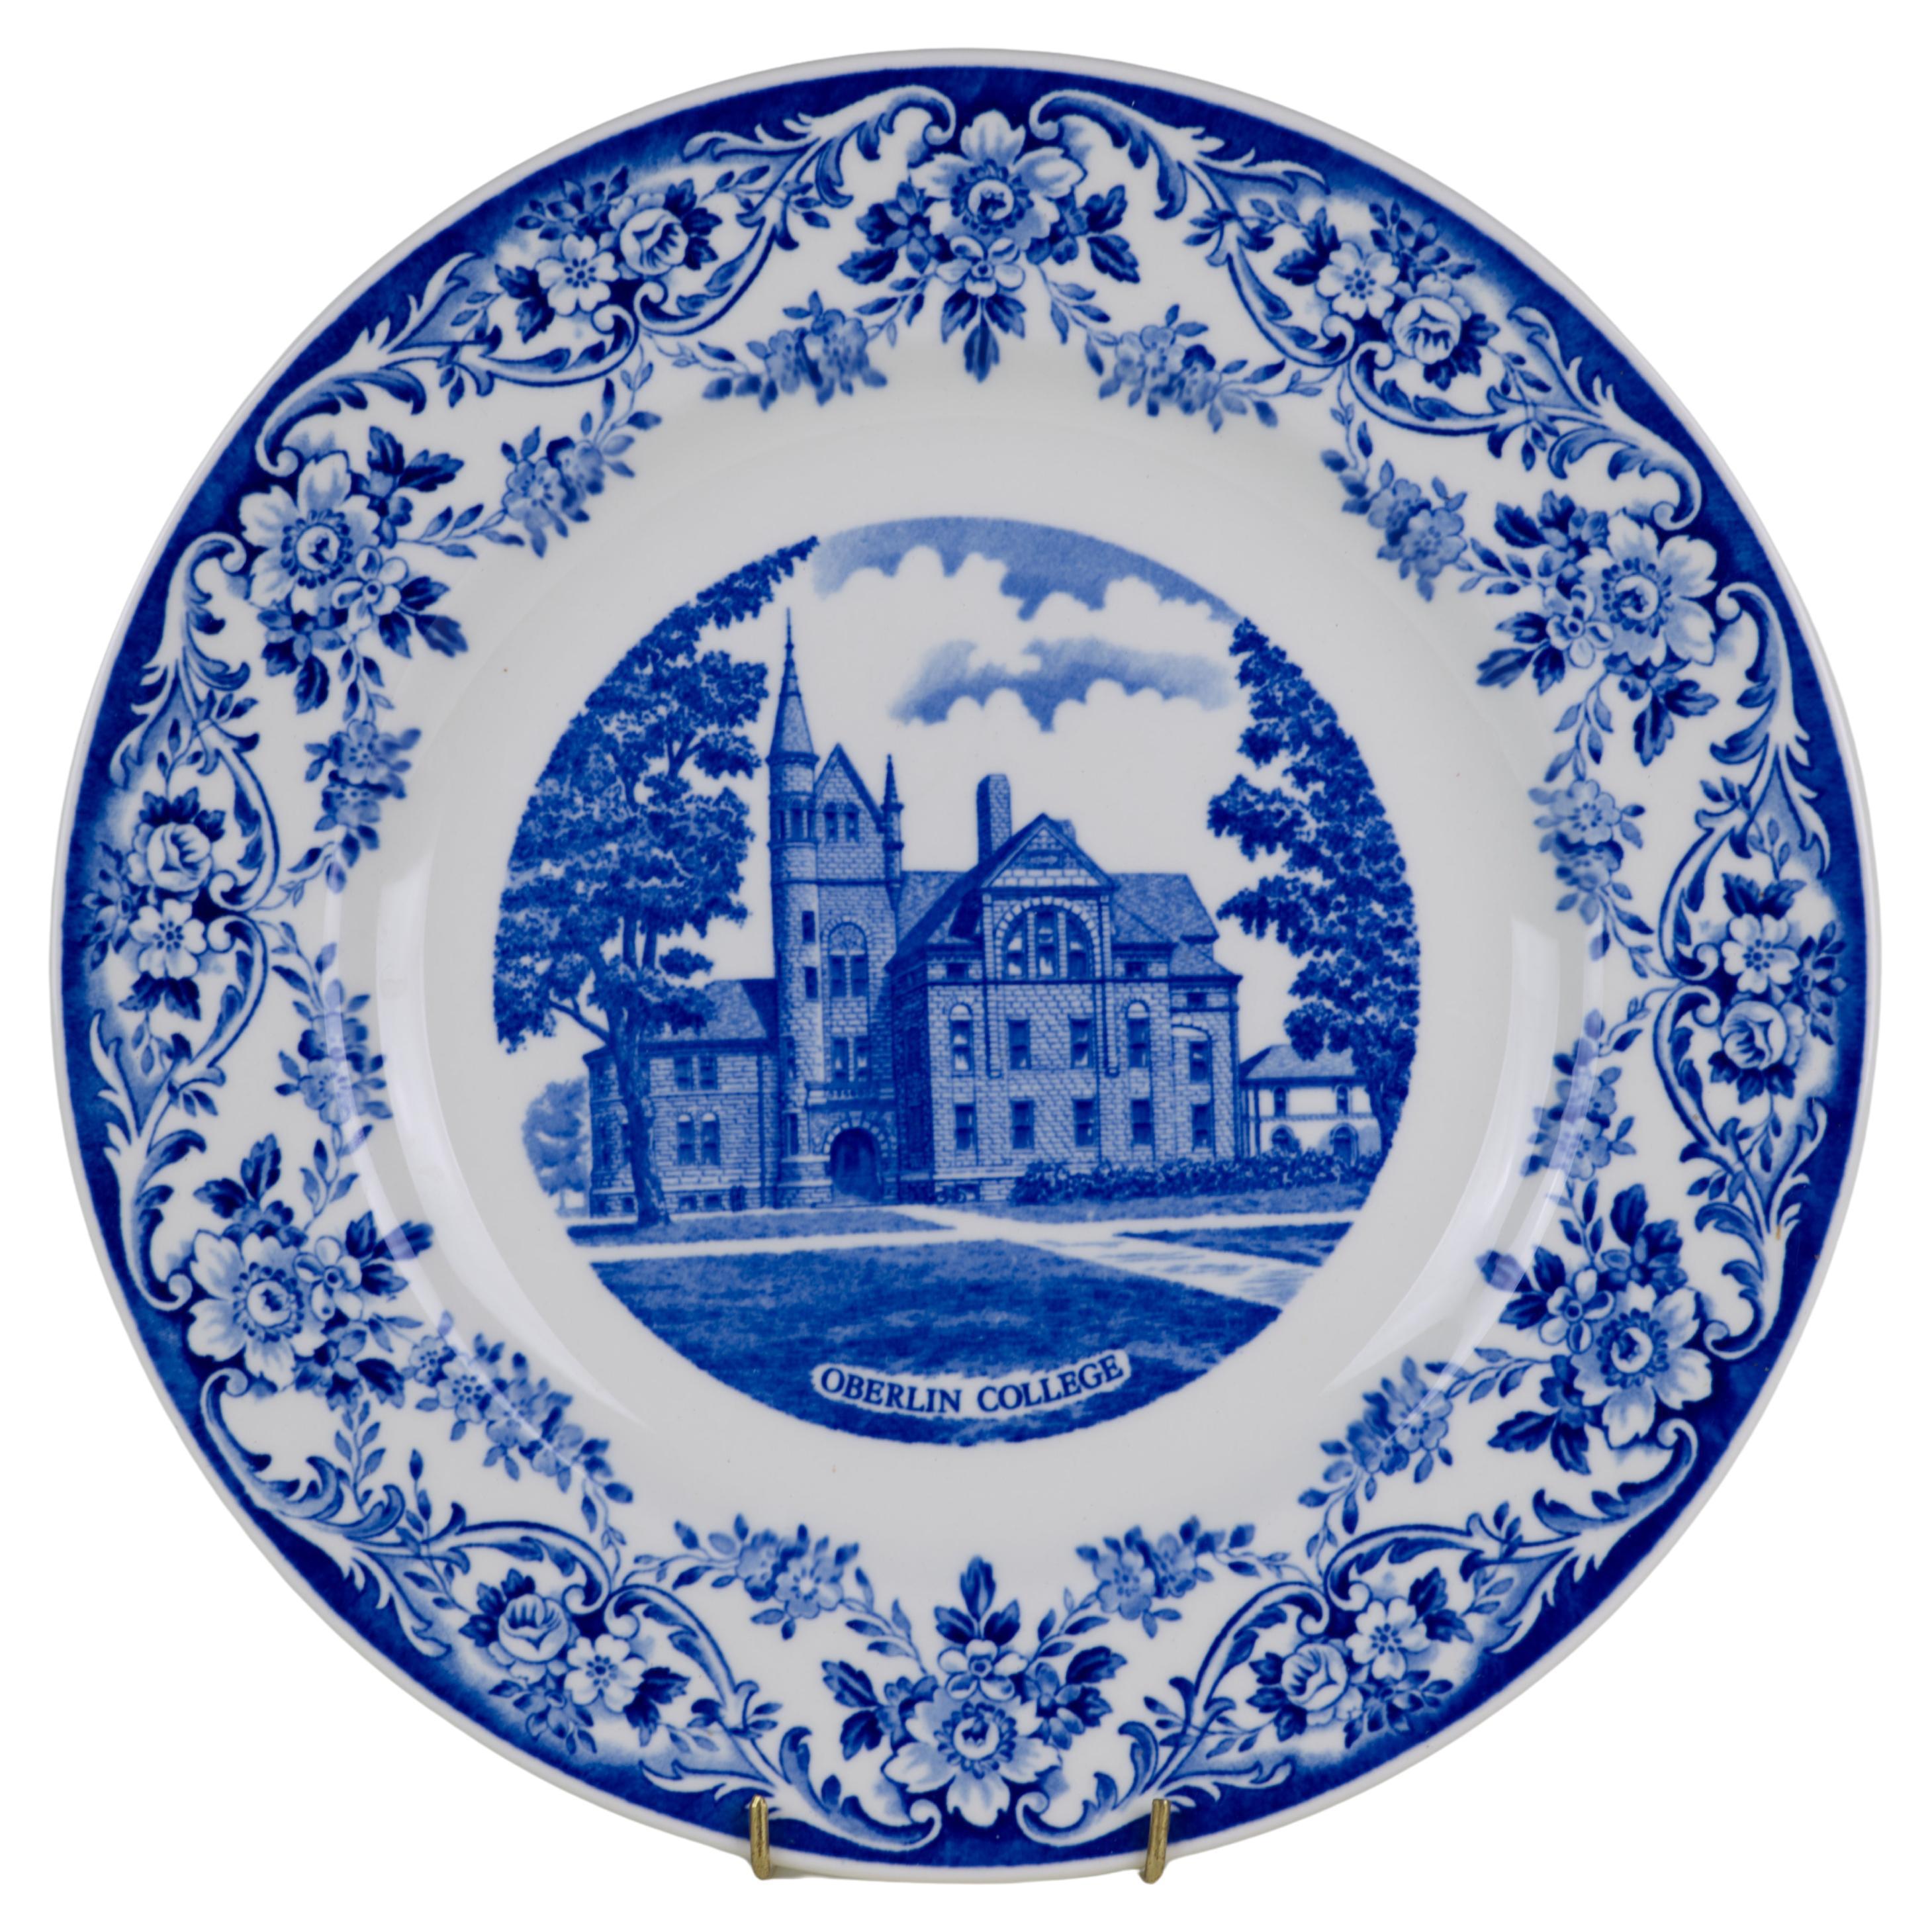 Rare Oberlin College Peters Hall Sesquicentennial Plate 1833-1983 Wedgewood